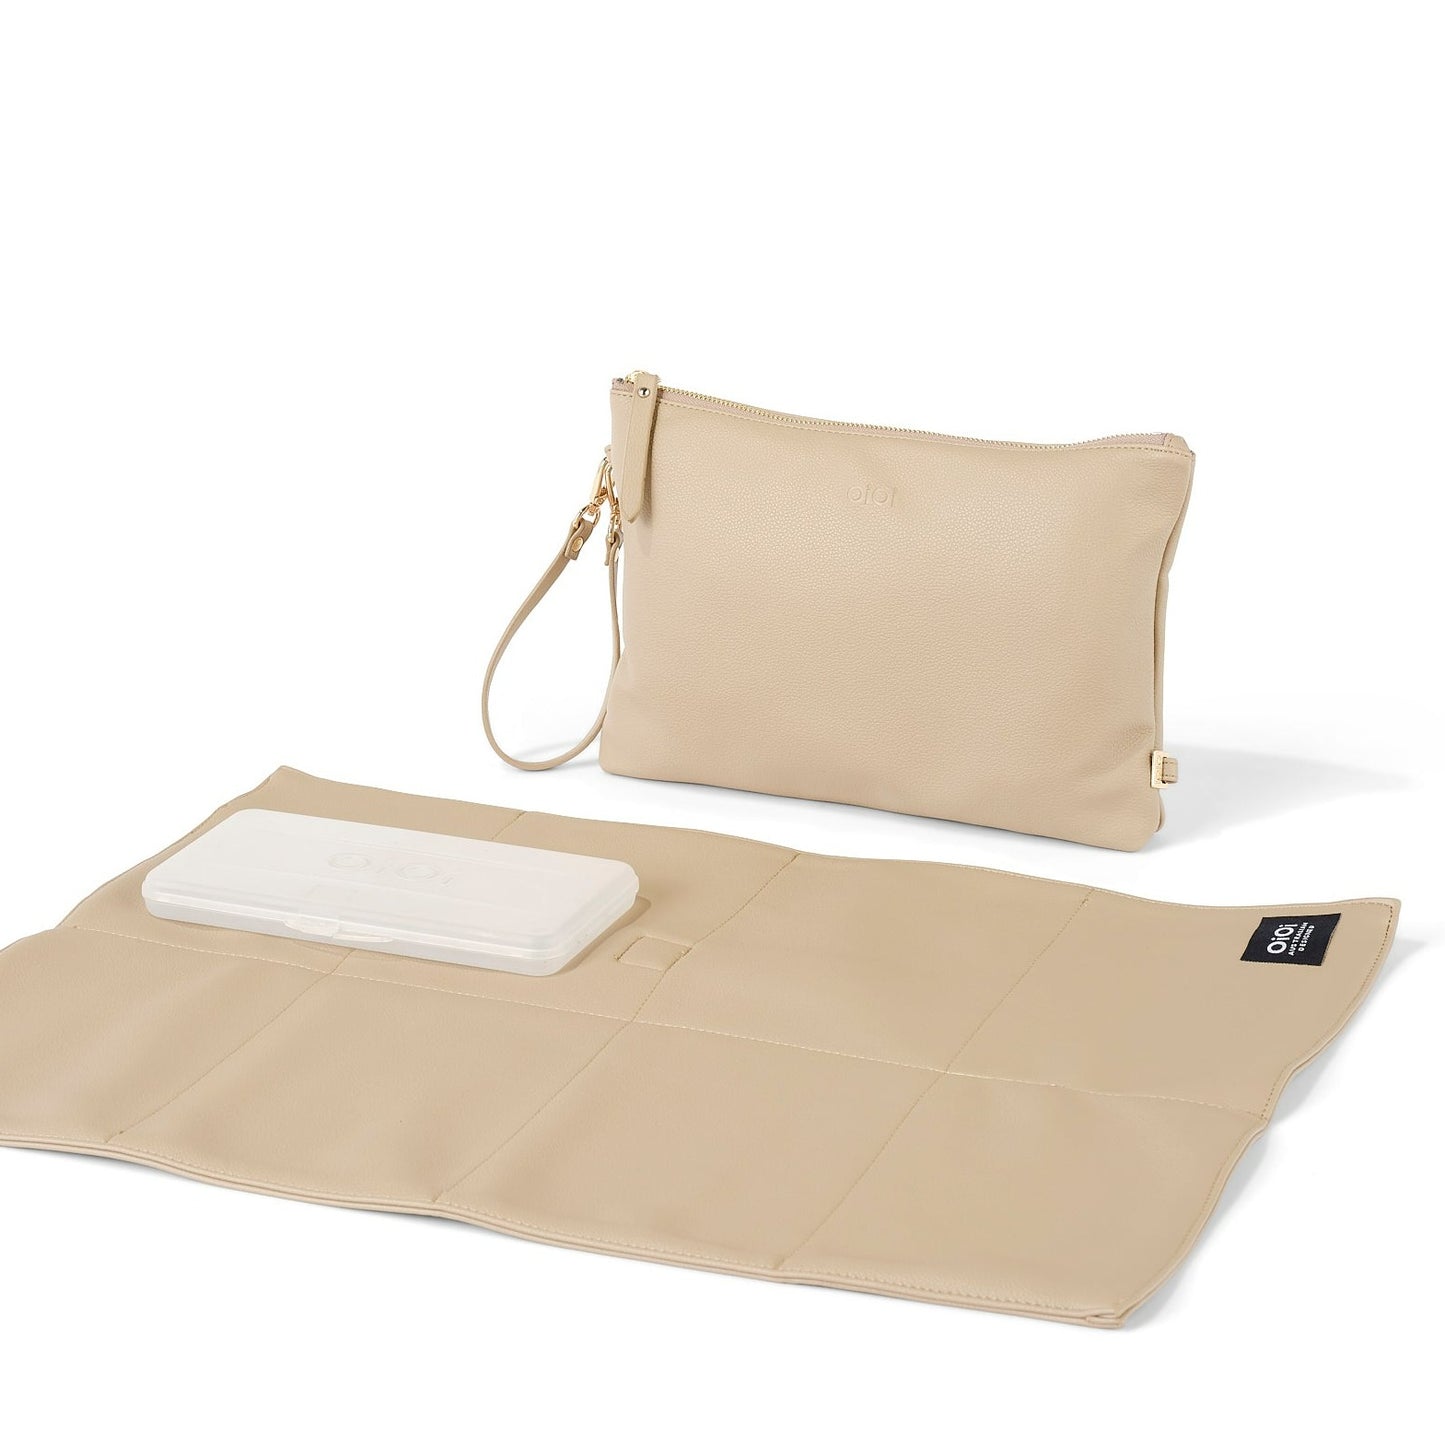 Diaper Changing Pouch - Oat Vegan Leather